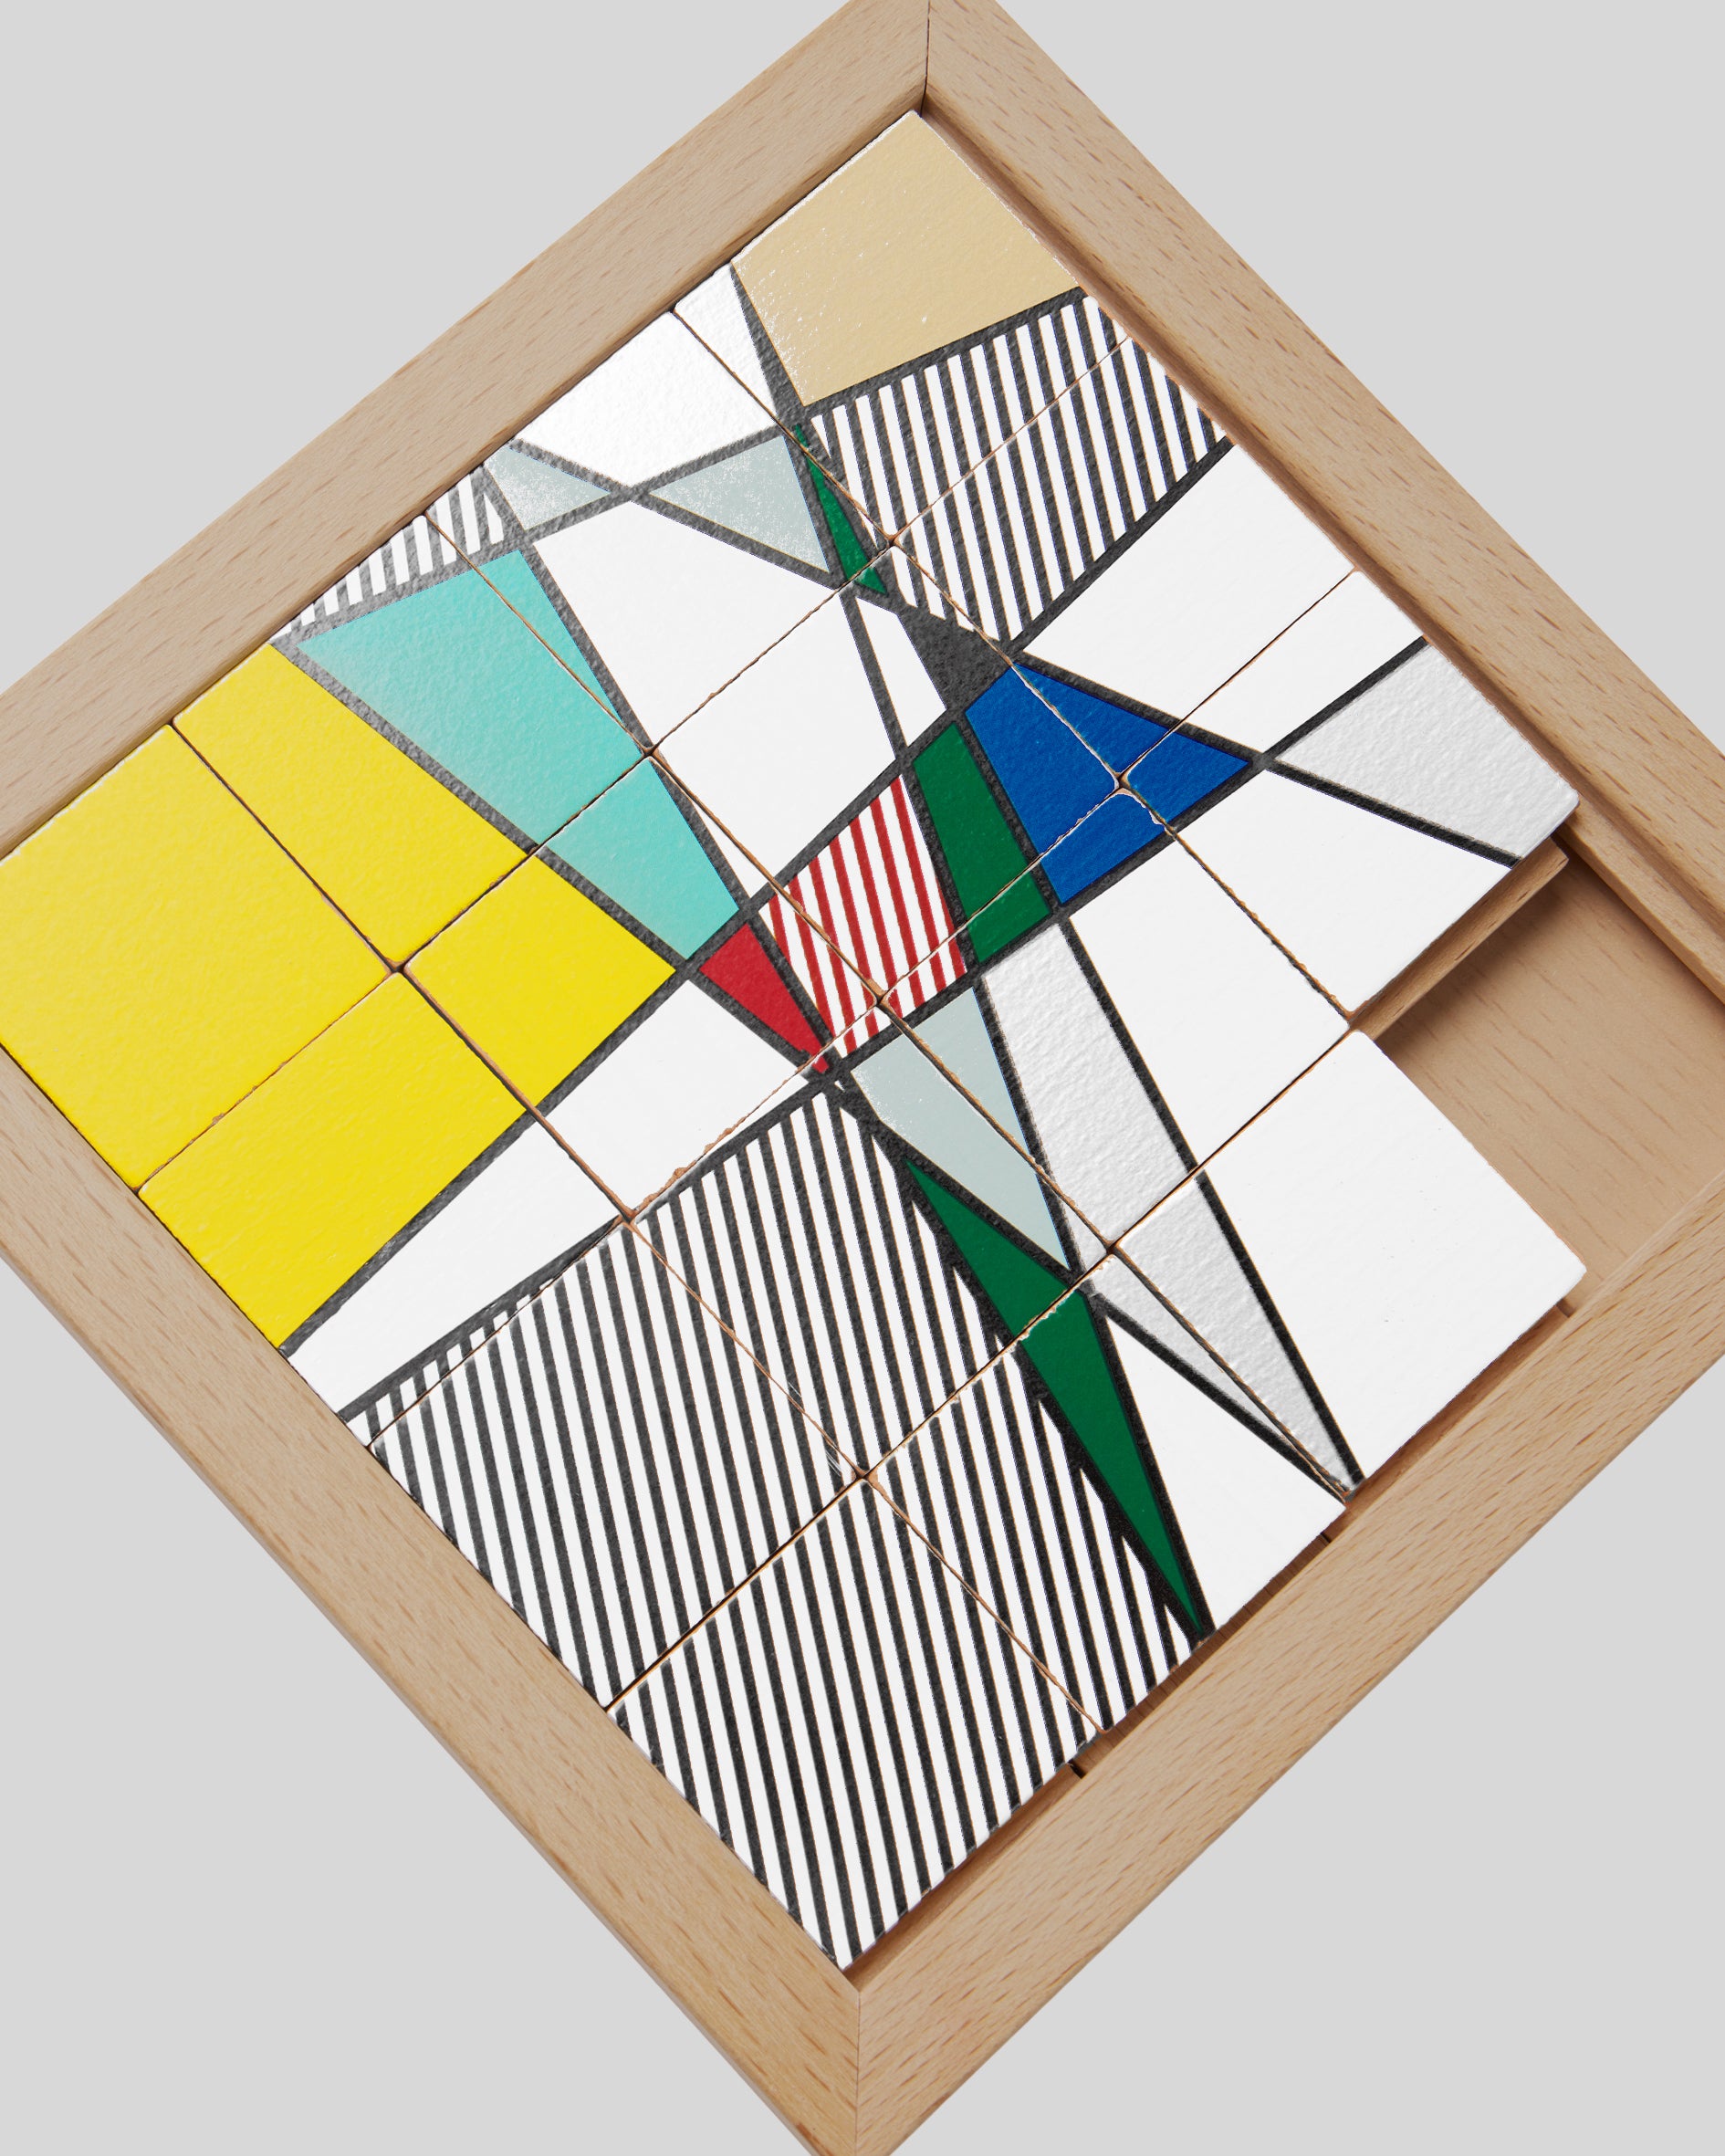 Lichtenstein Perfect/Imperfect Tile Puzzle Game close up